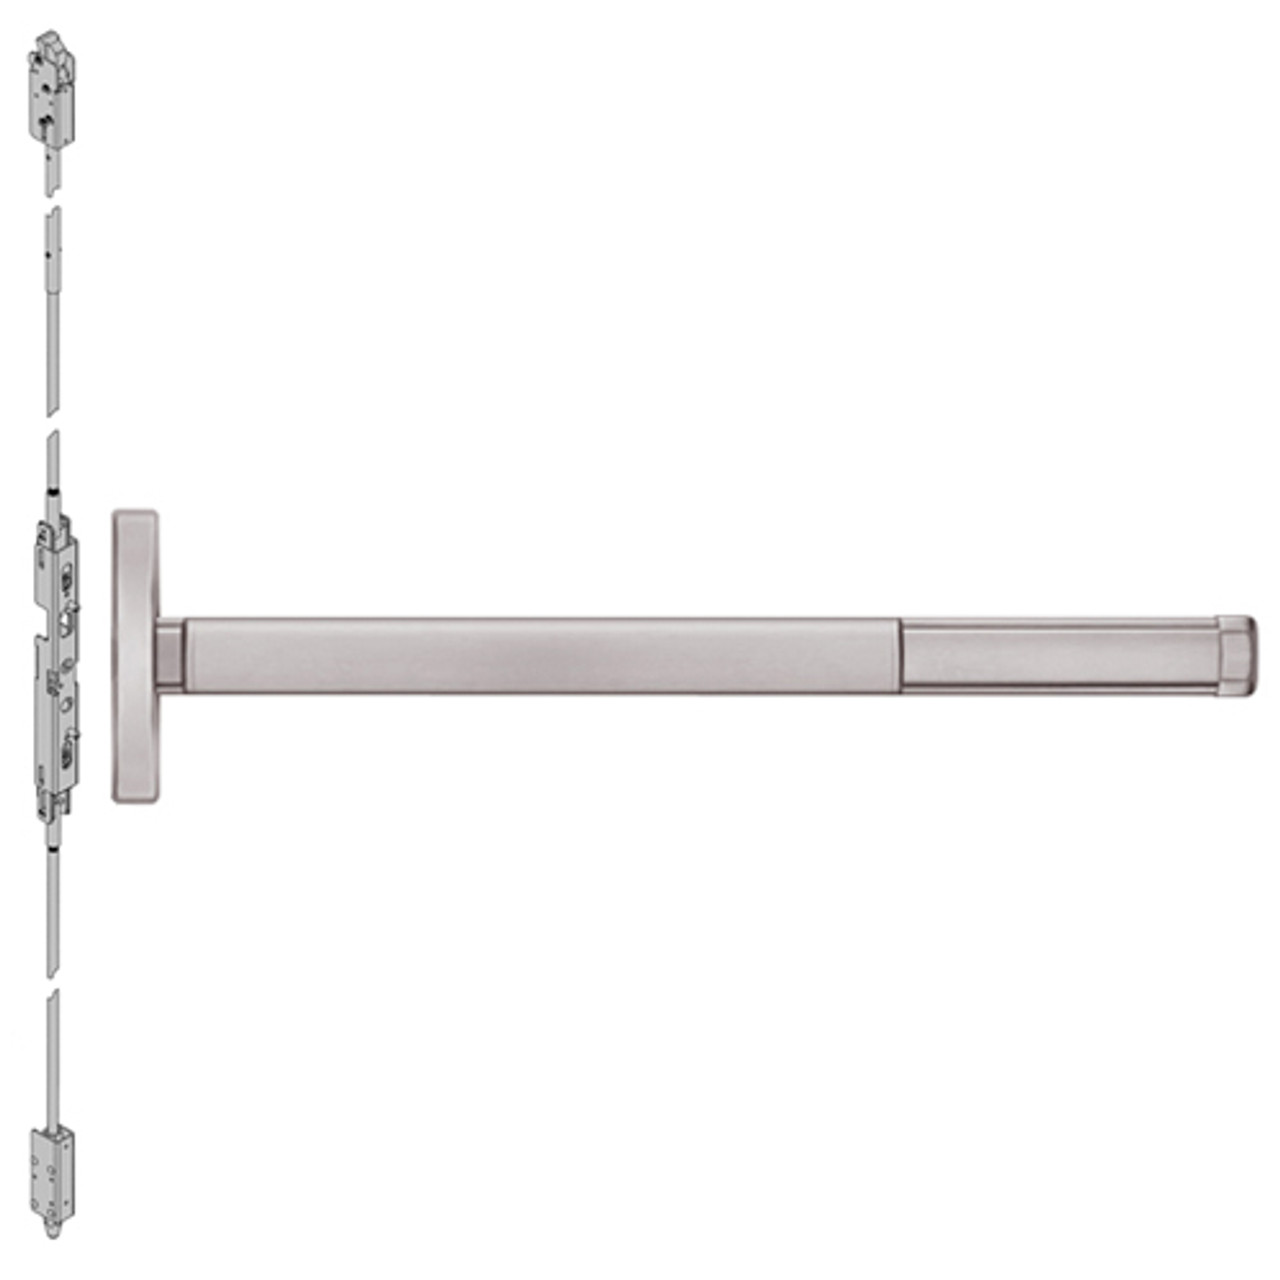 TS2603LBR-628-48 PHI 2600 Series Concealed Vertical Rod Exit Device with Touchbar Monitoring Switch Prepped for Key Retracts Latchbolt in Satin Aluminum Finish